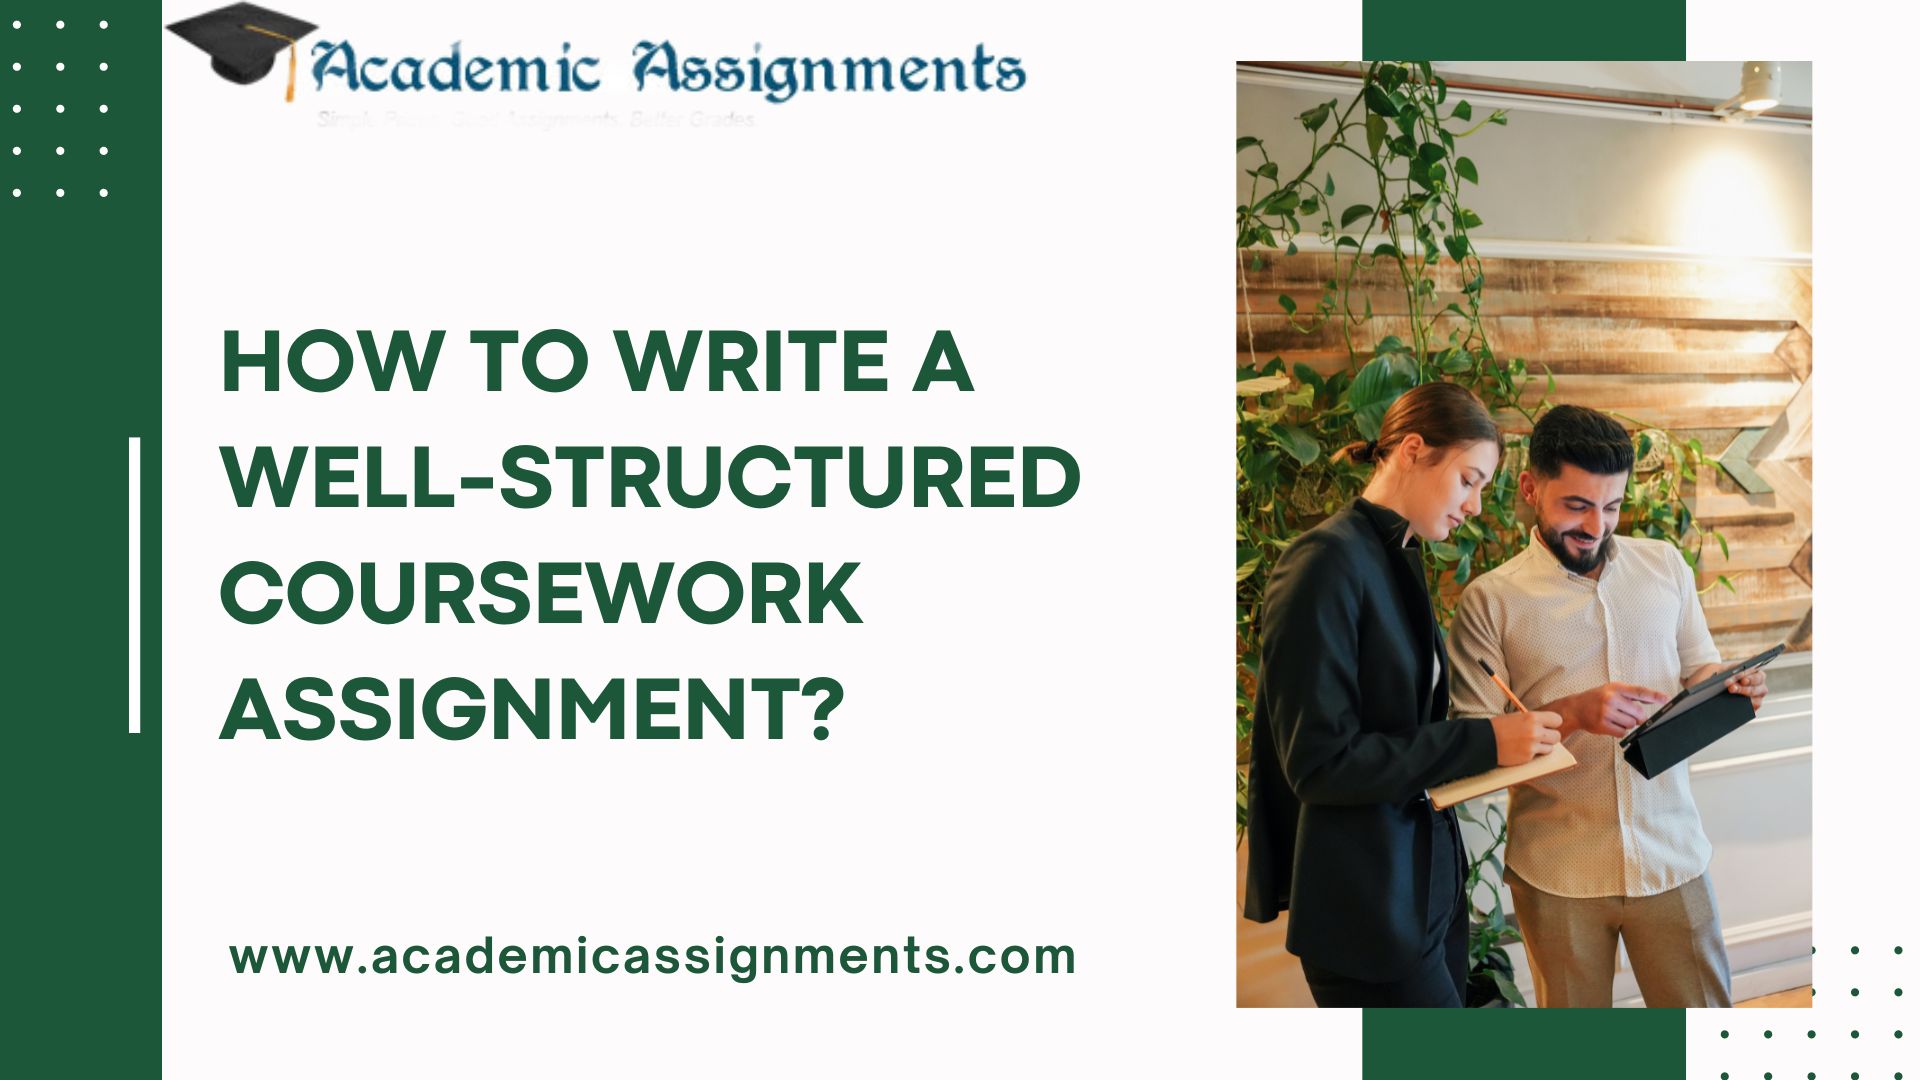 How to Write a Well-Structured Coursework Assignment